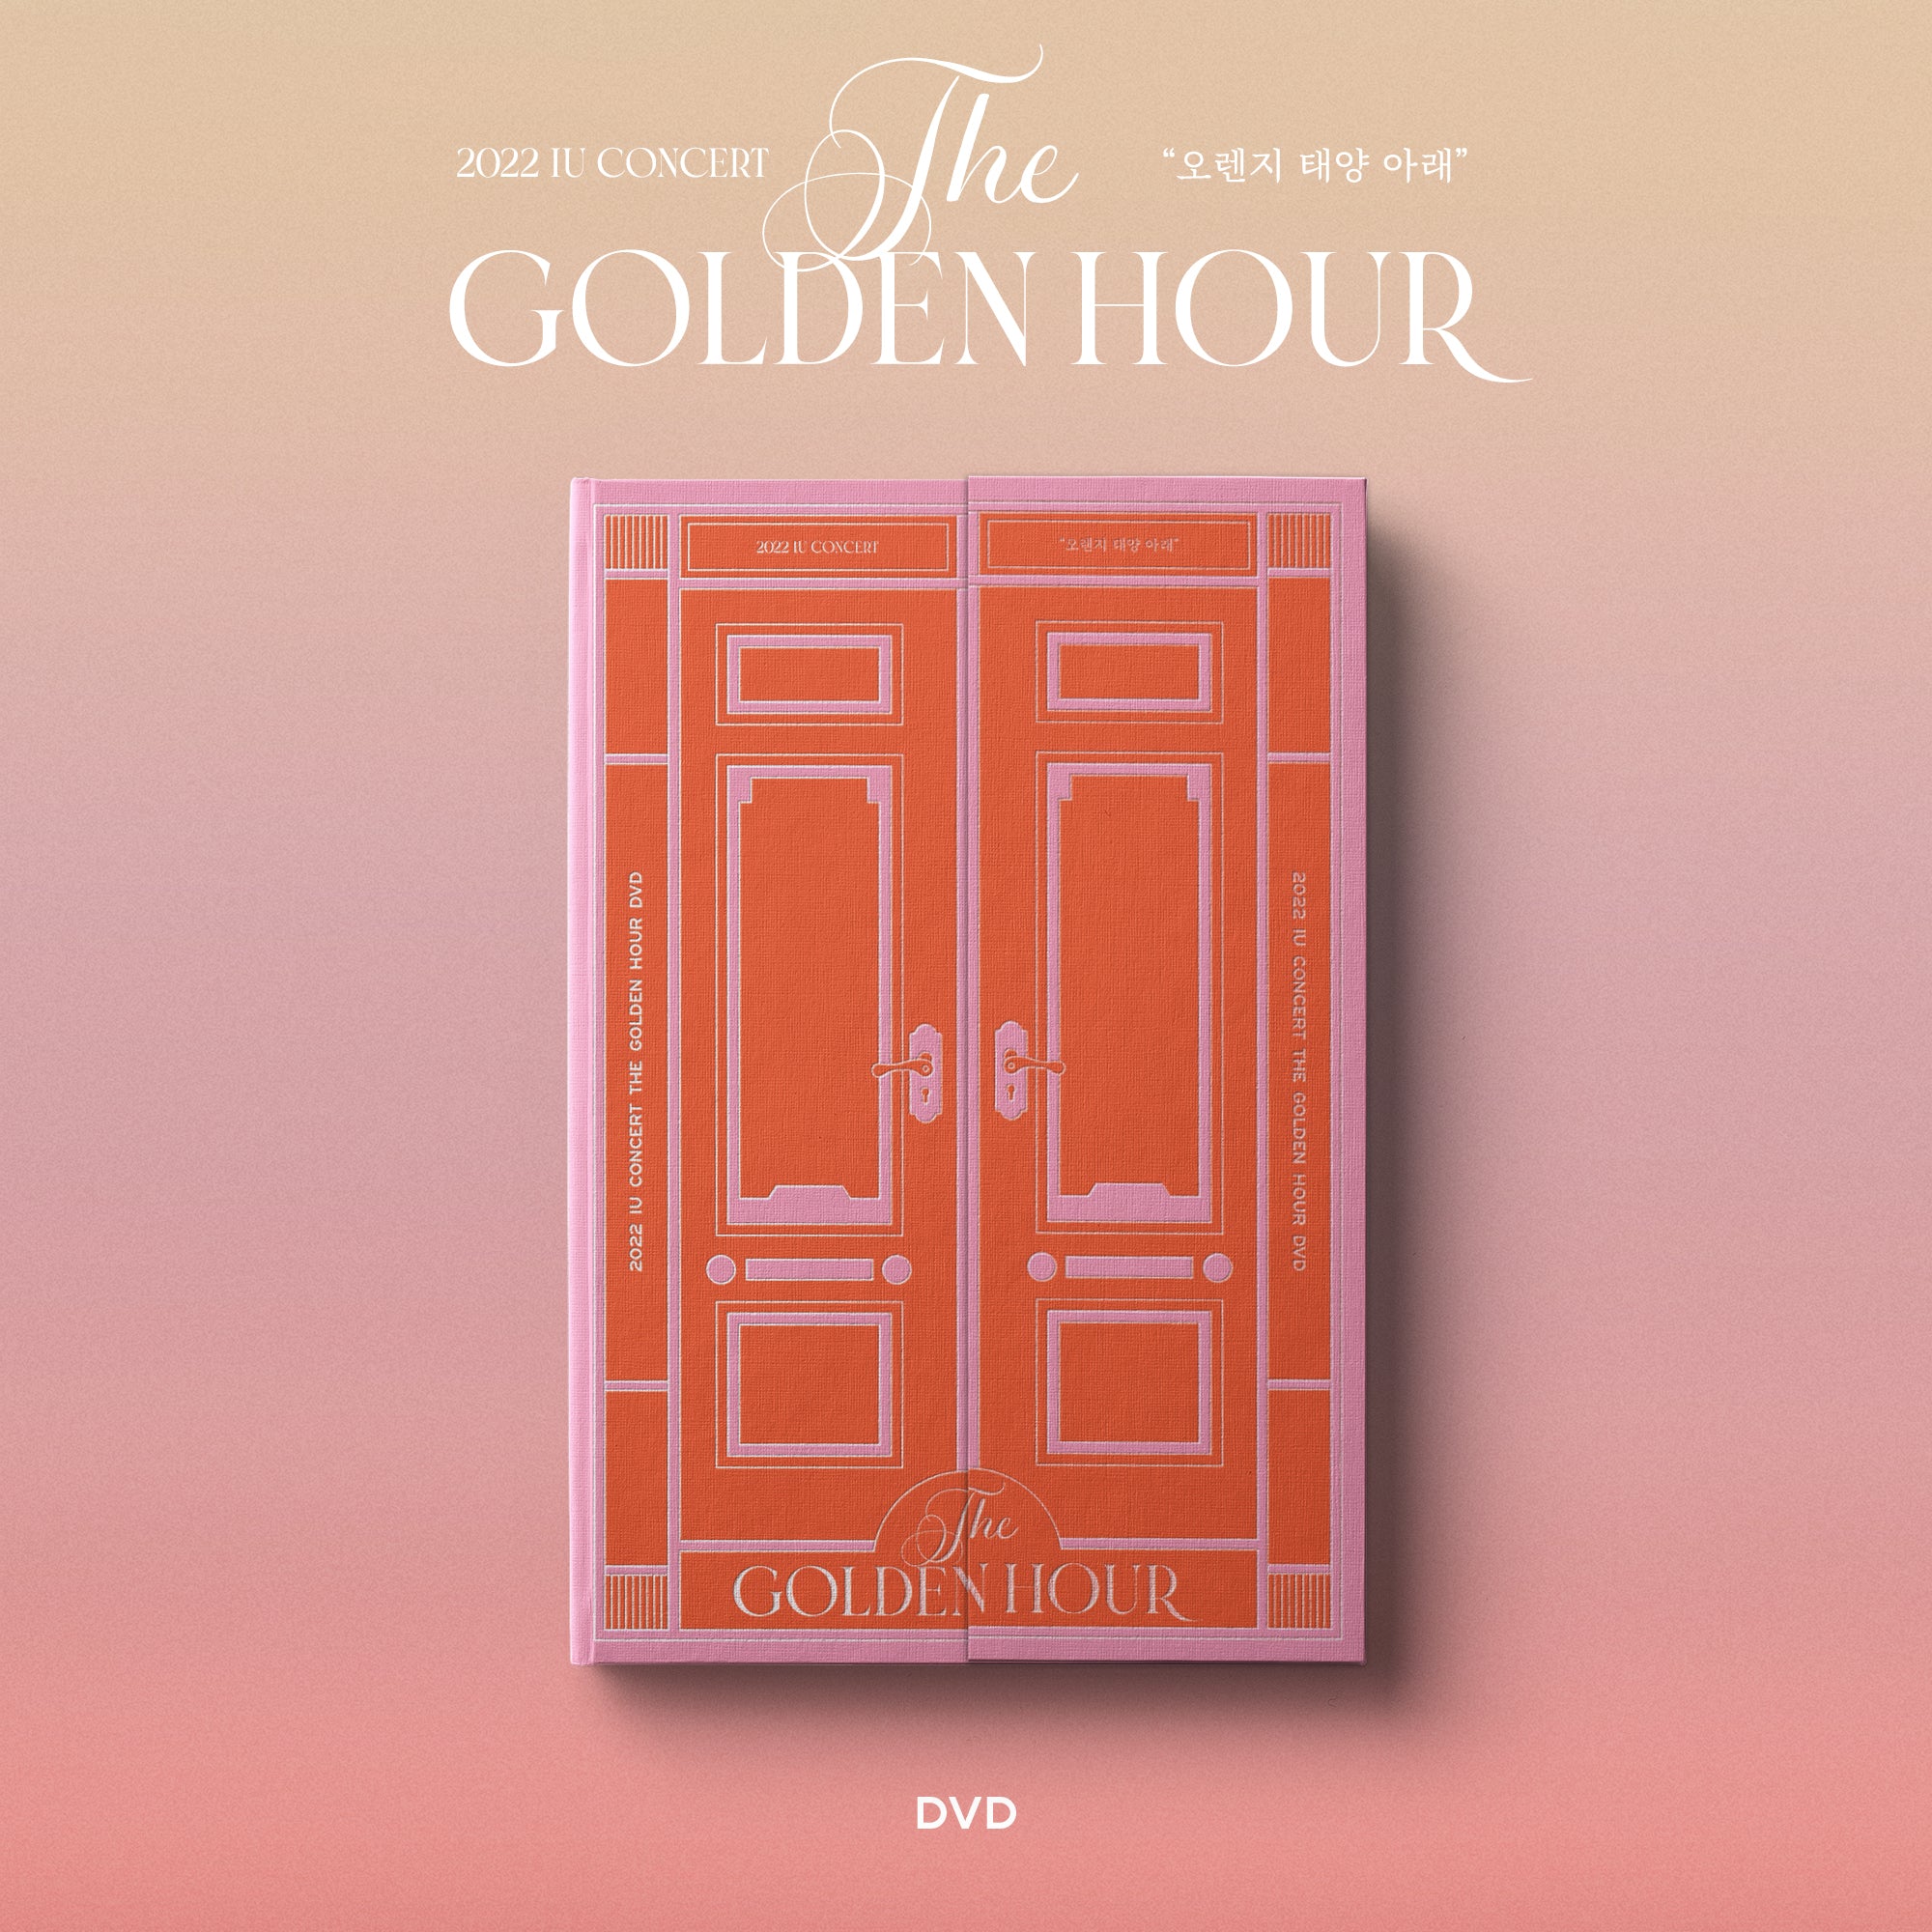 IU 2022 CONCERT 'THE GOLDEN HOUR' DVD COVER 1